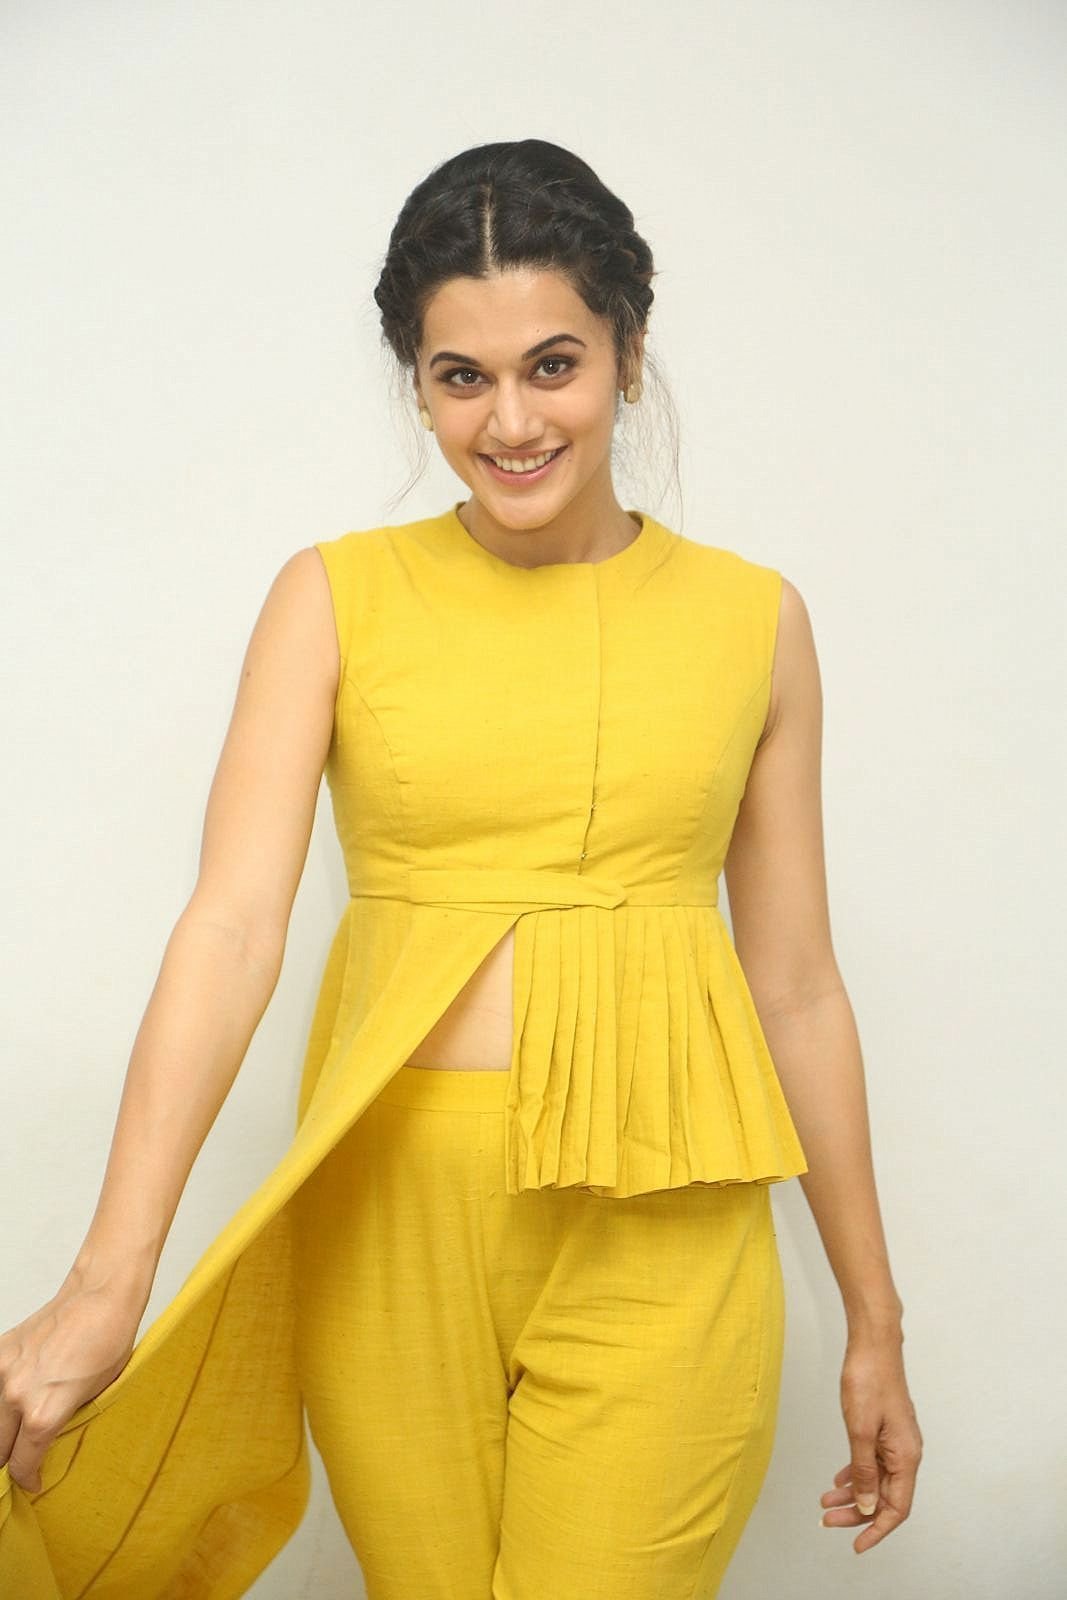 Taapsee Pannu at Anando Brahma Movie Motion Poster Launch Photos | Picture 1500604